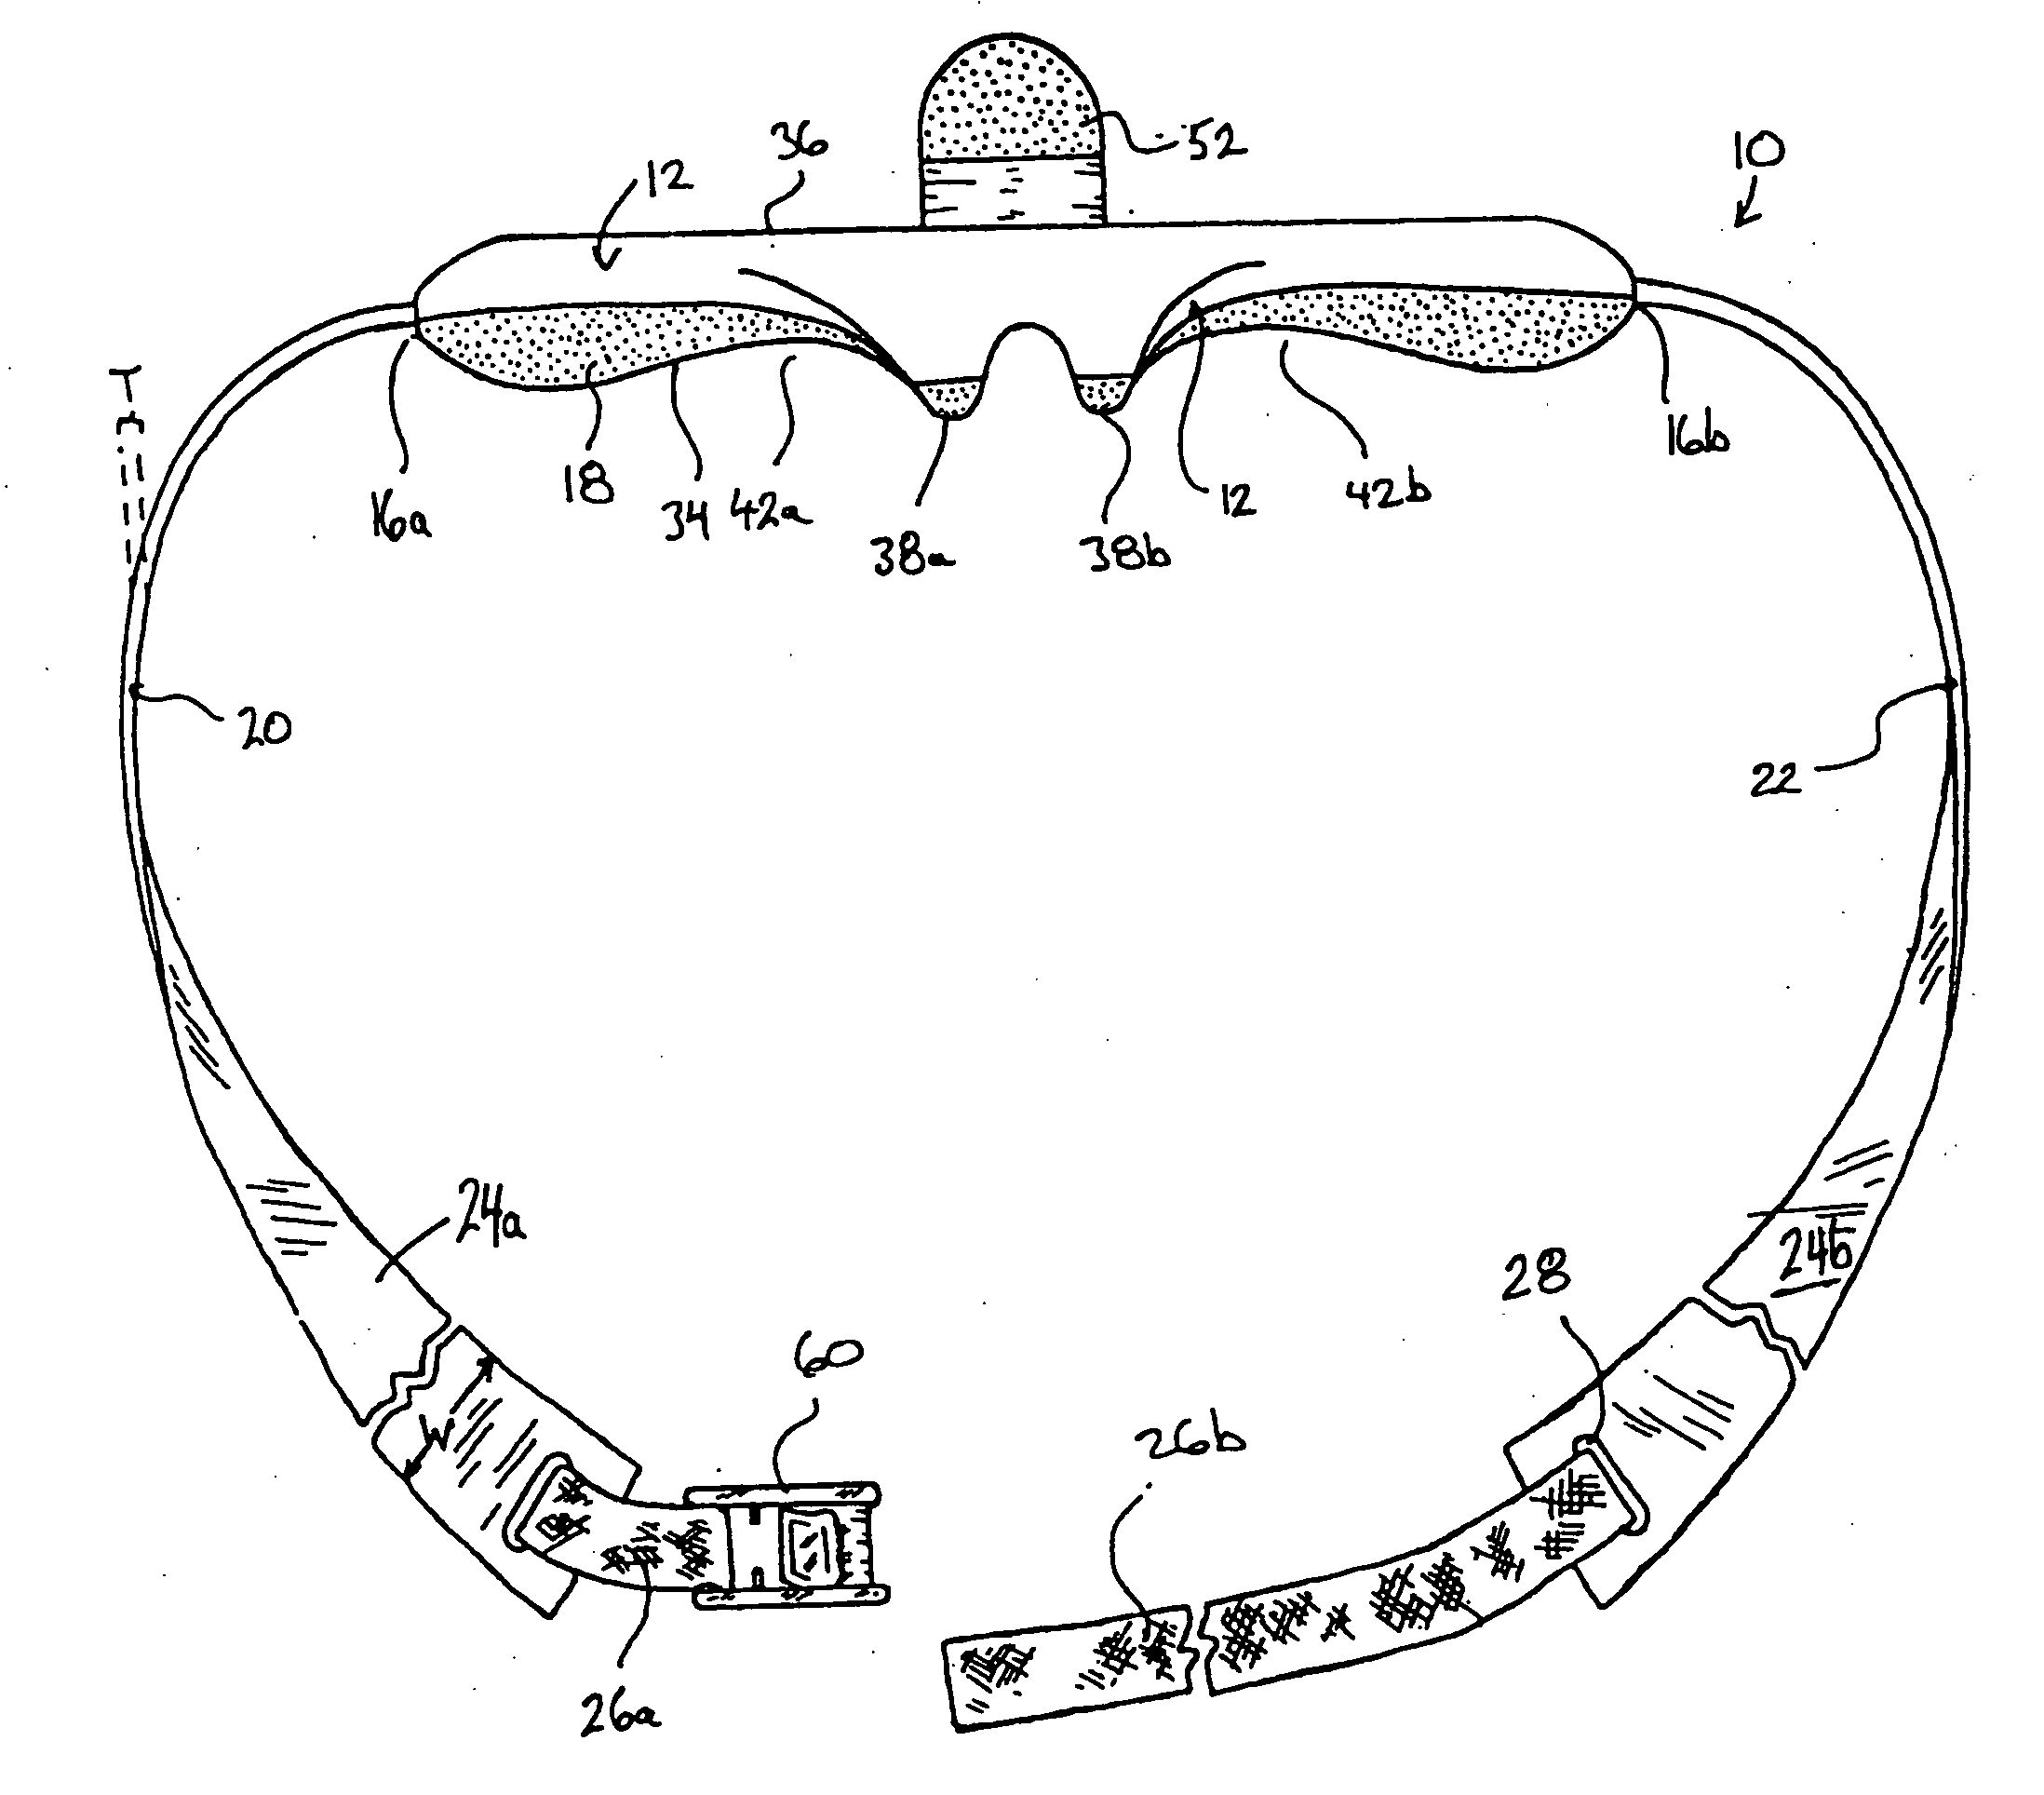 Physical Therapy Apparatus for Self-Administered Soft Tissue Manipulation